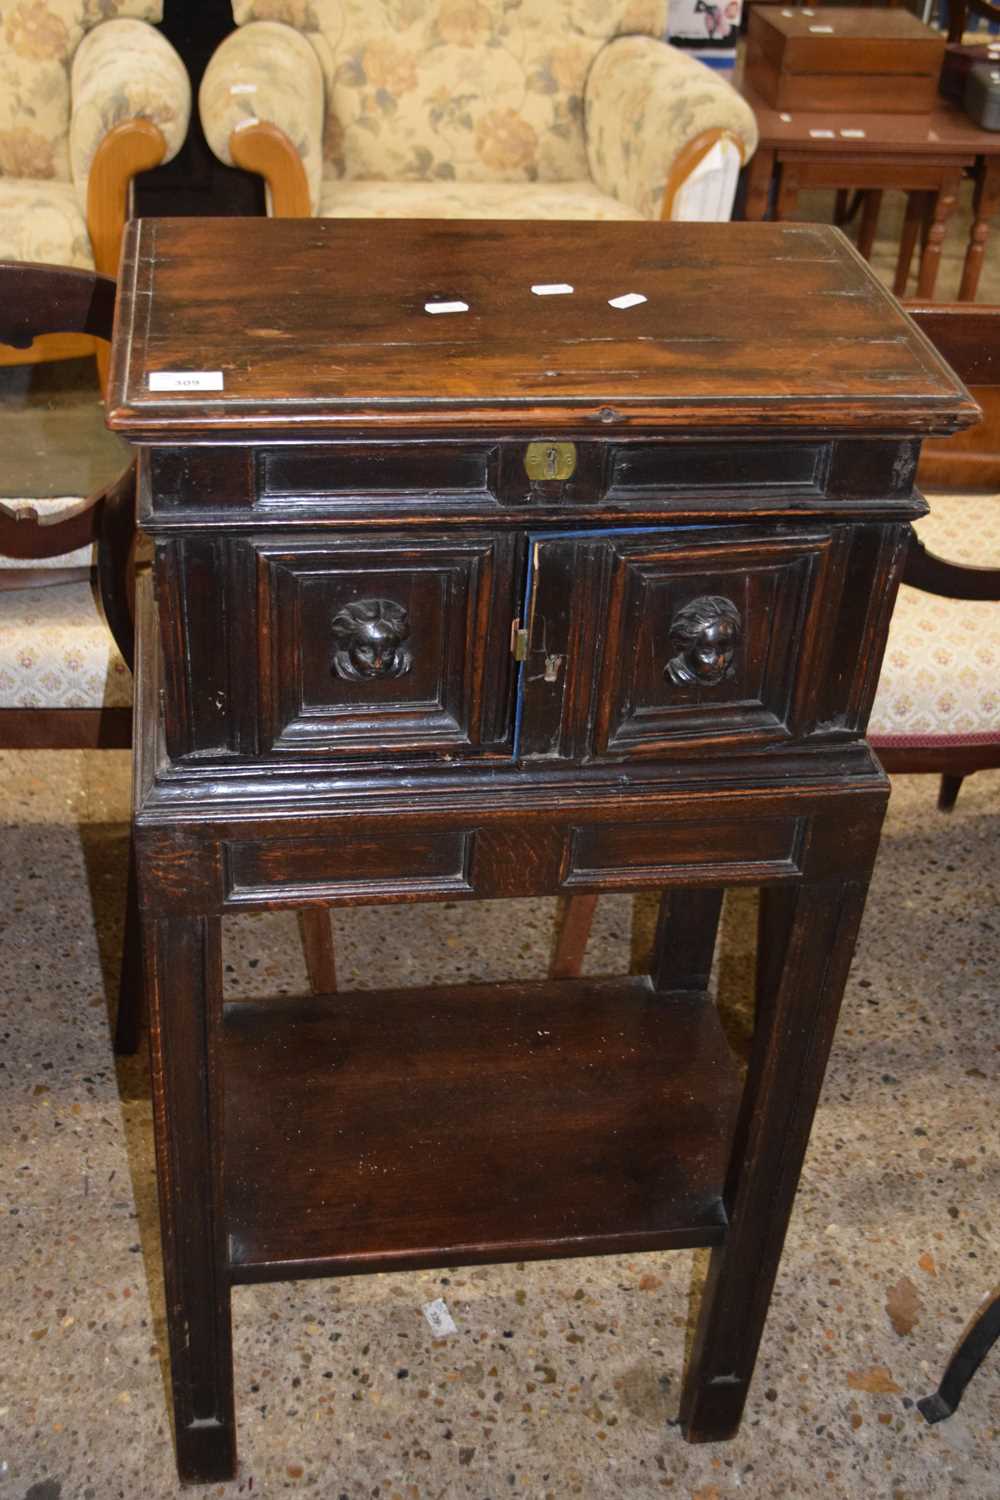 Adapted antique cabinet on stand, with lift lid opening to a blue fabric lined interior containing